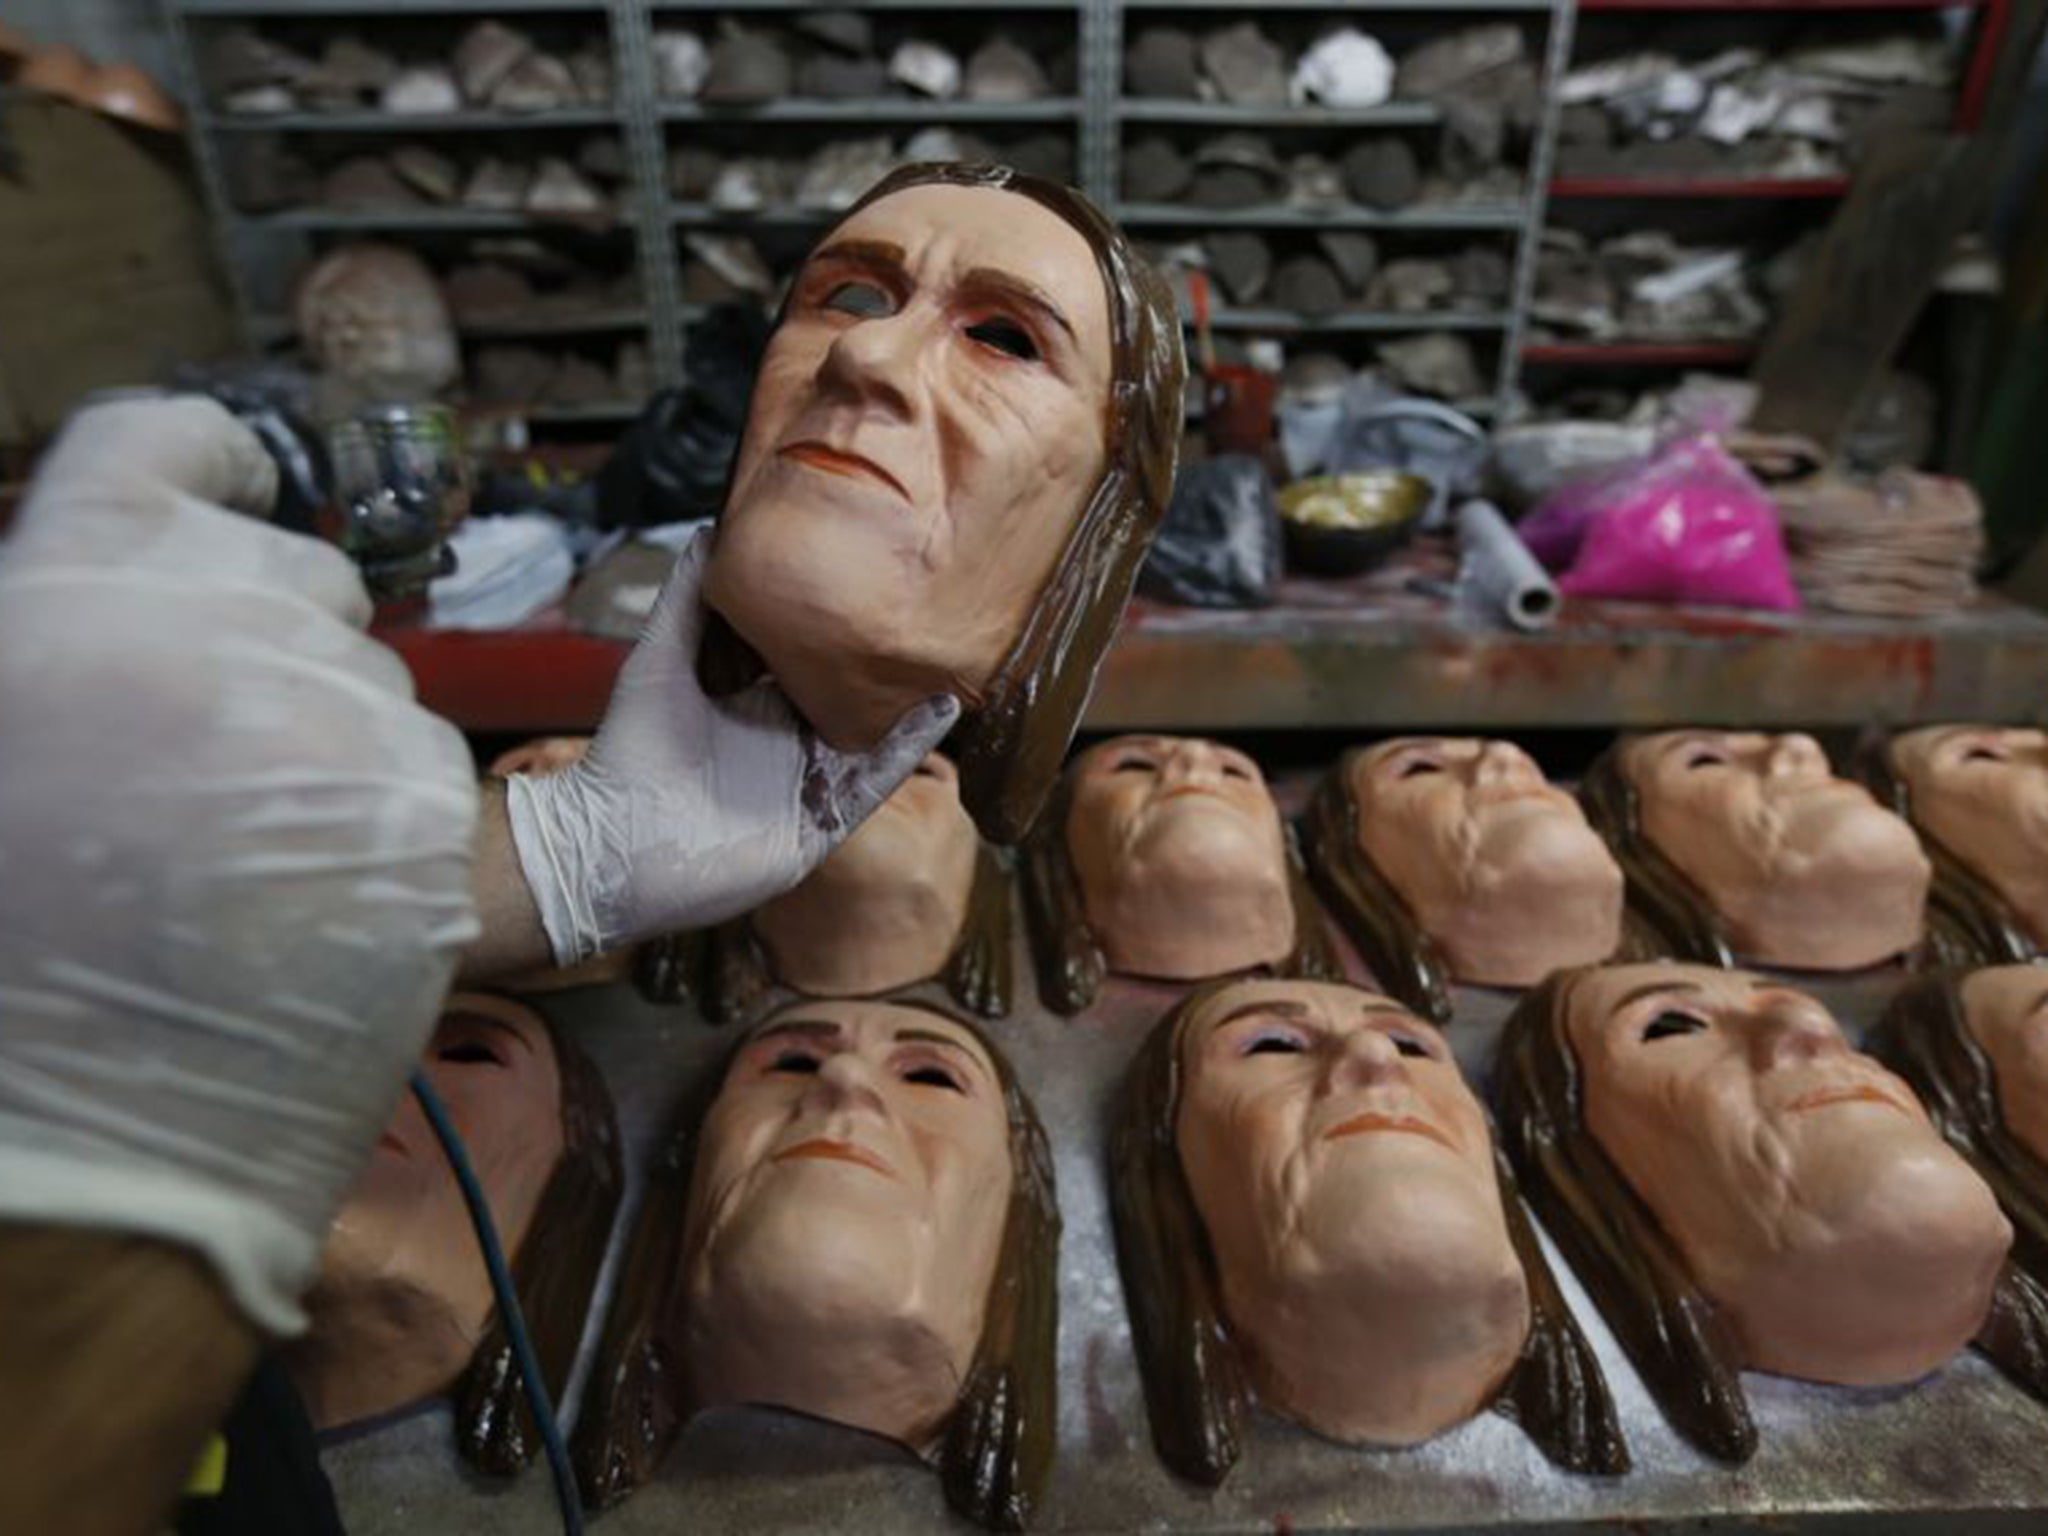 Masks of Maria das Graças Silva Foster being prepared for this year’s Rio Carnival, reflecting the high public profile of the unfolding scandal